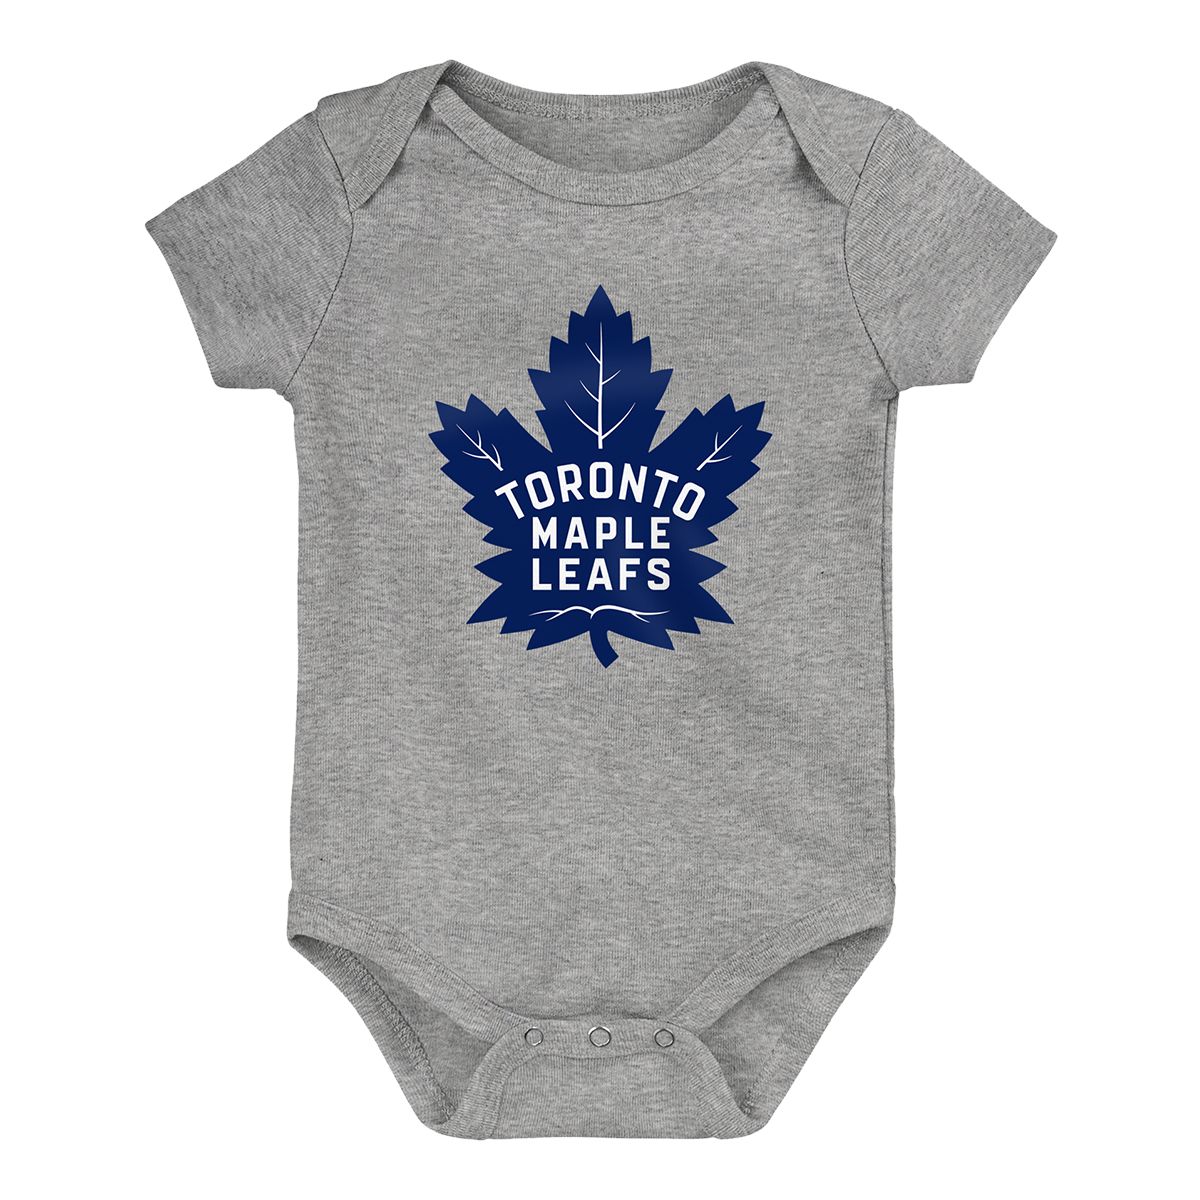 Toronto Maple Leafs Outerstuff Girls' Infant Fashion Jersey